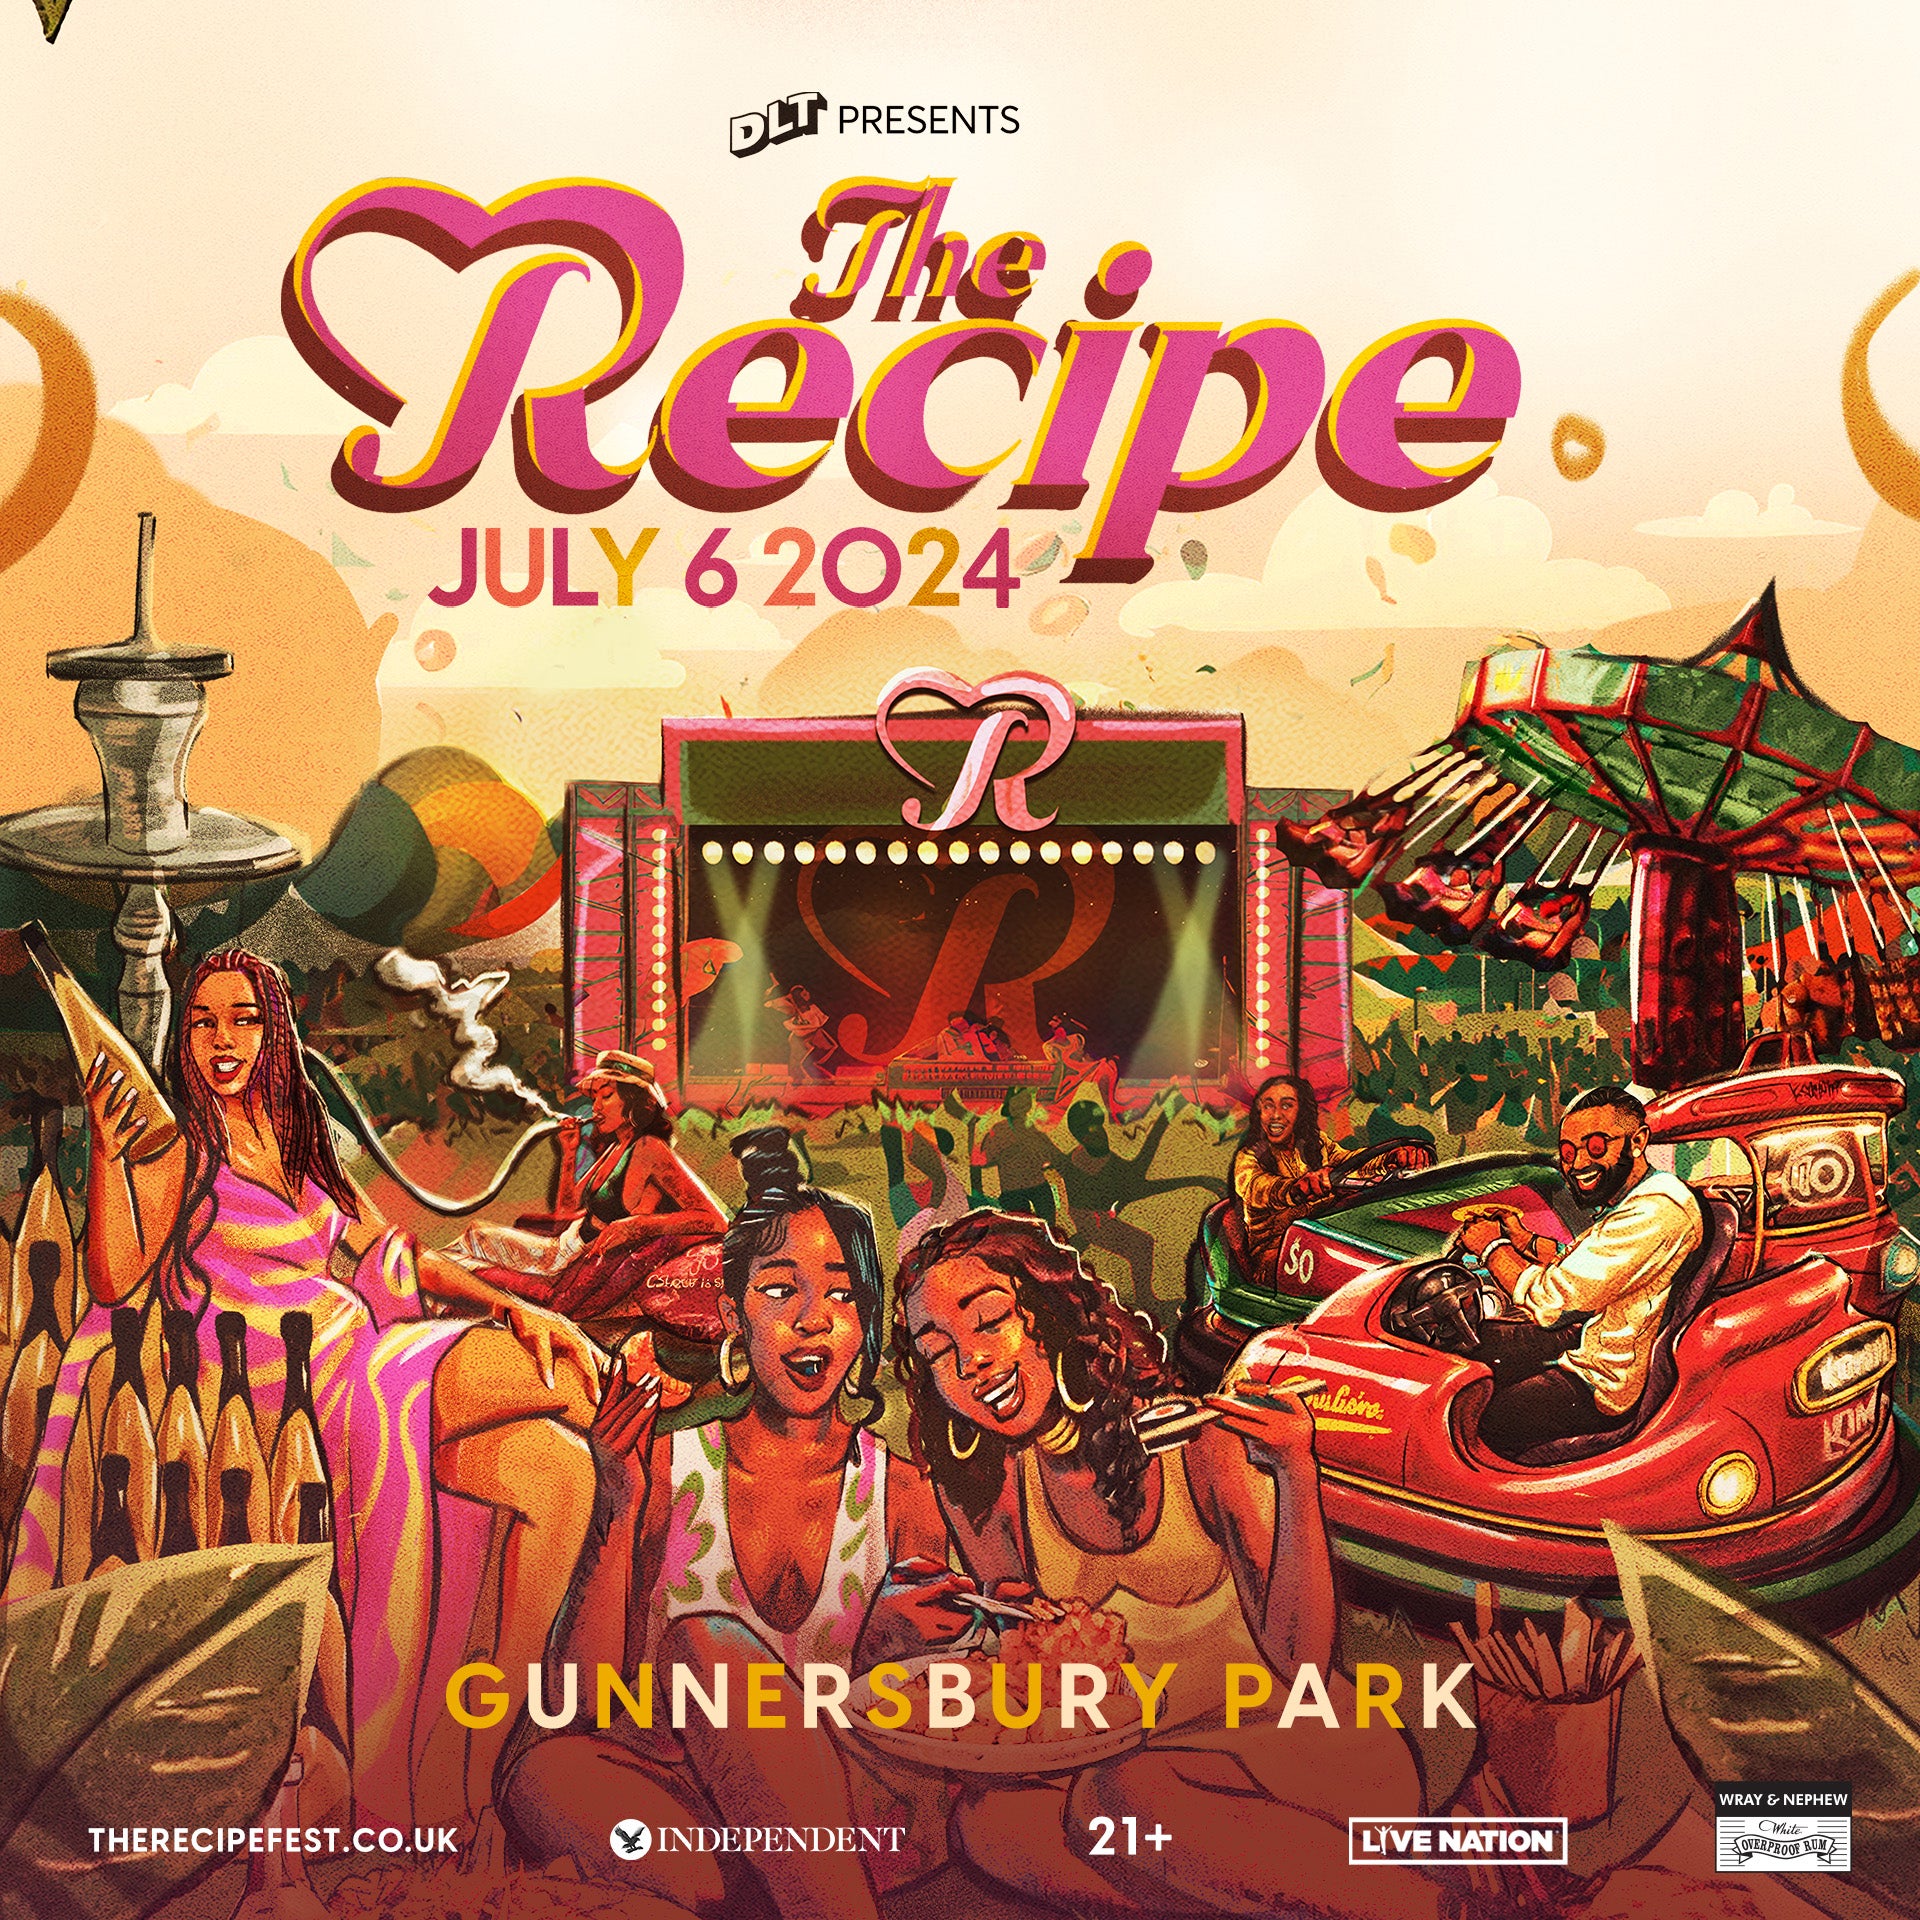 A poster for new London festival The Recipe